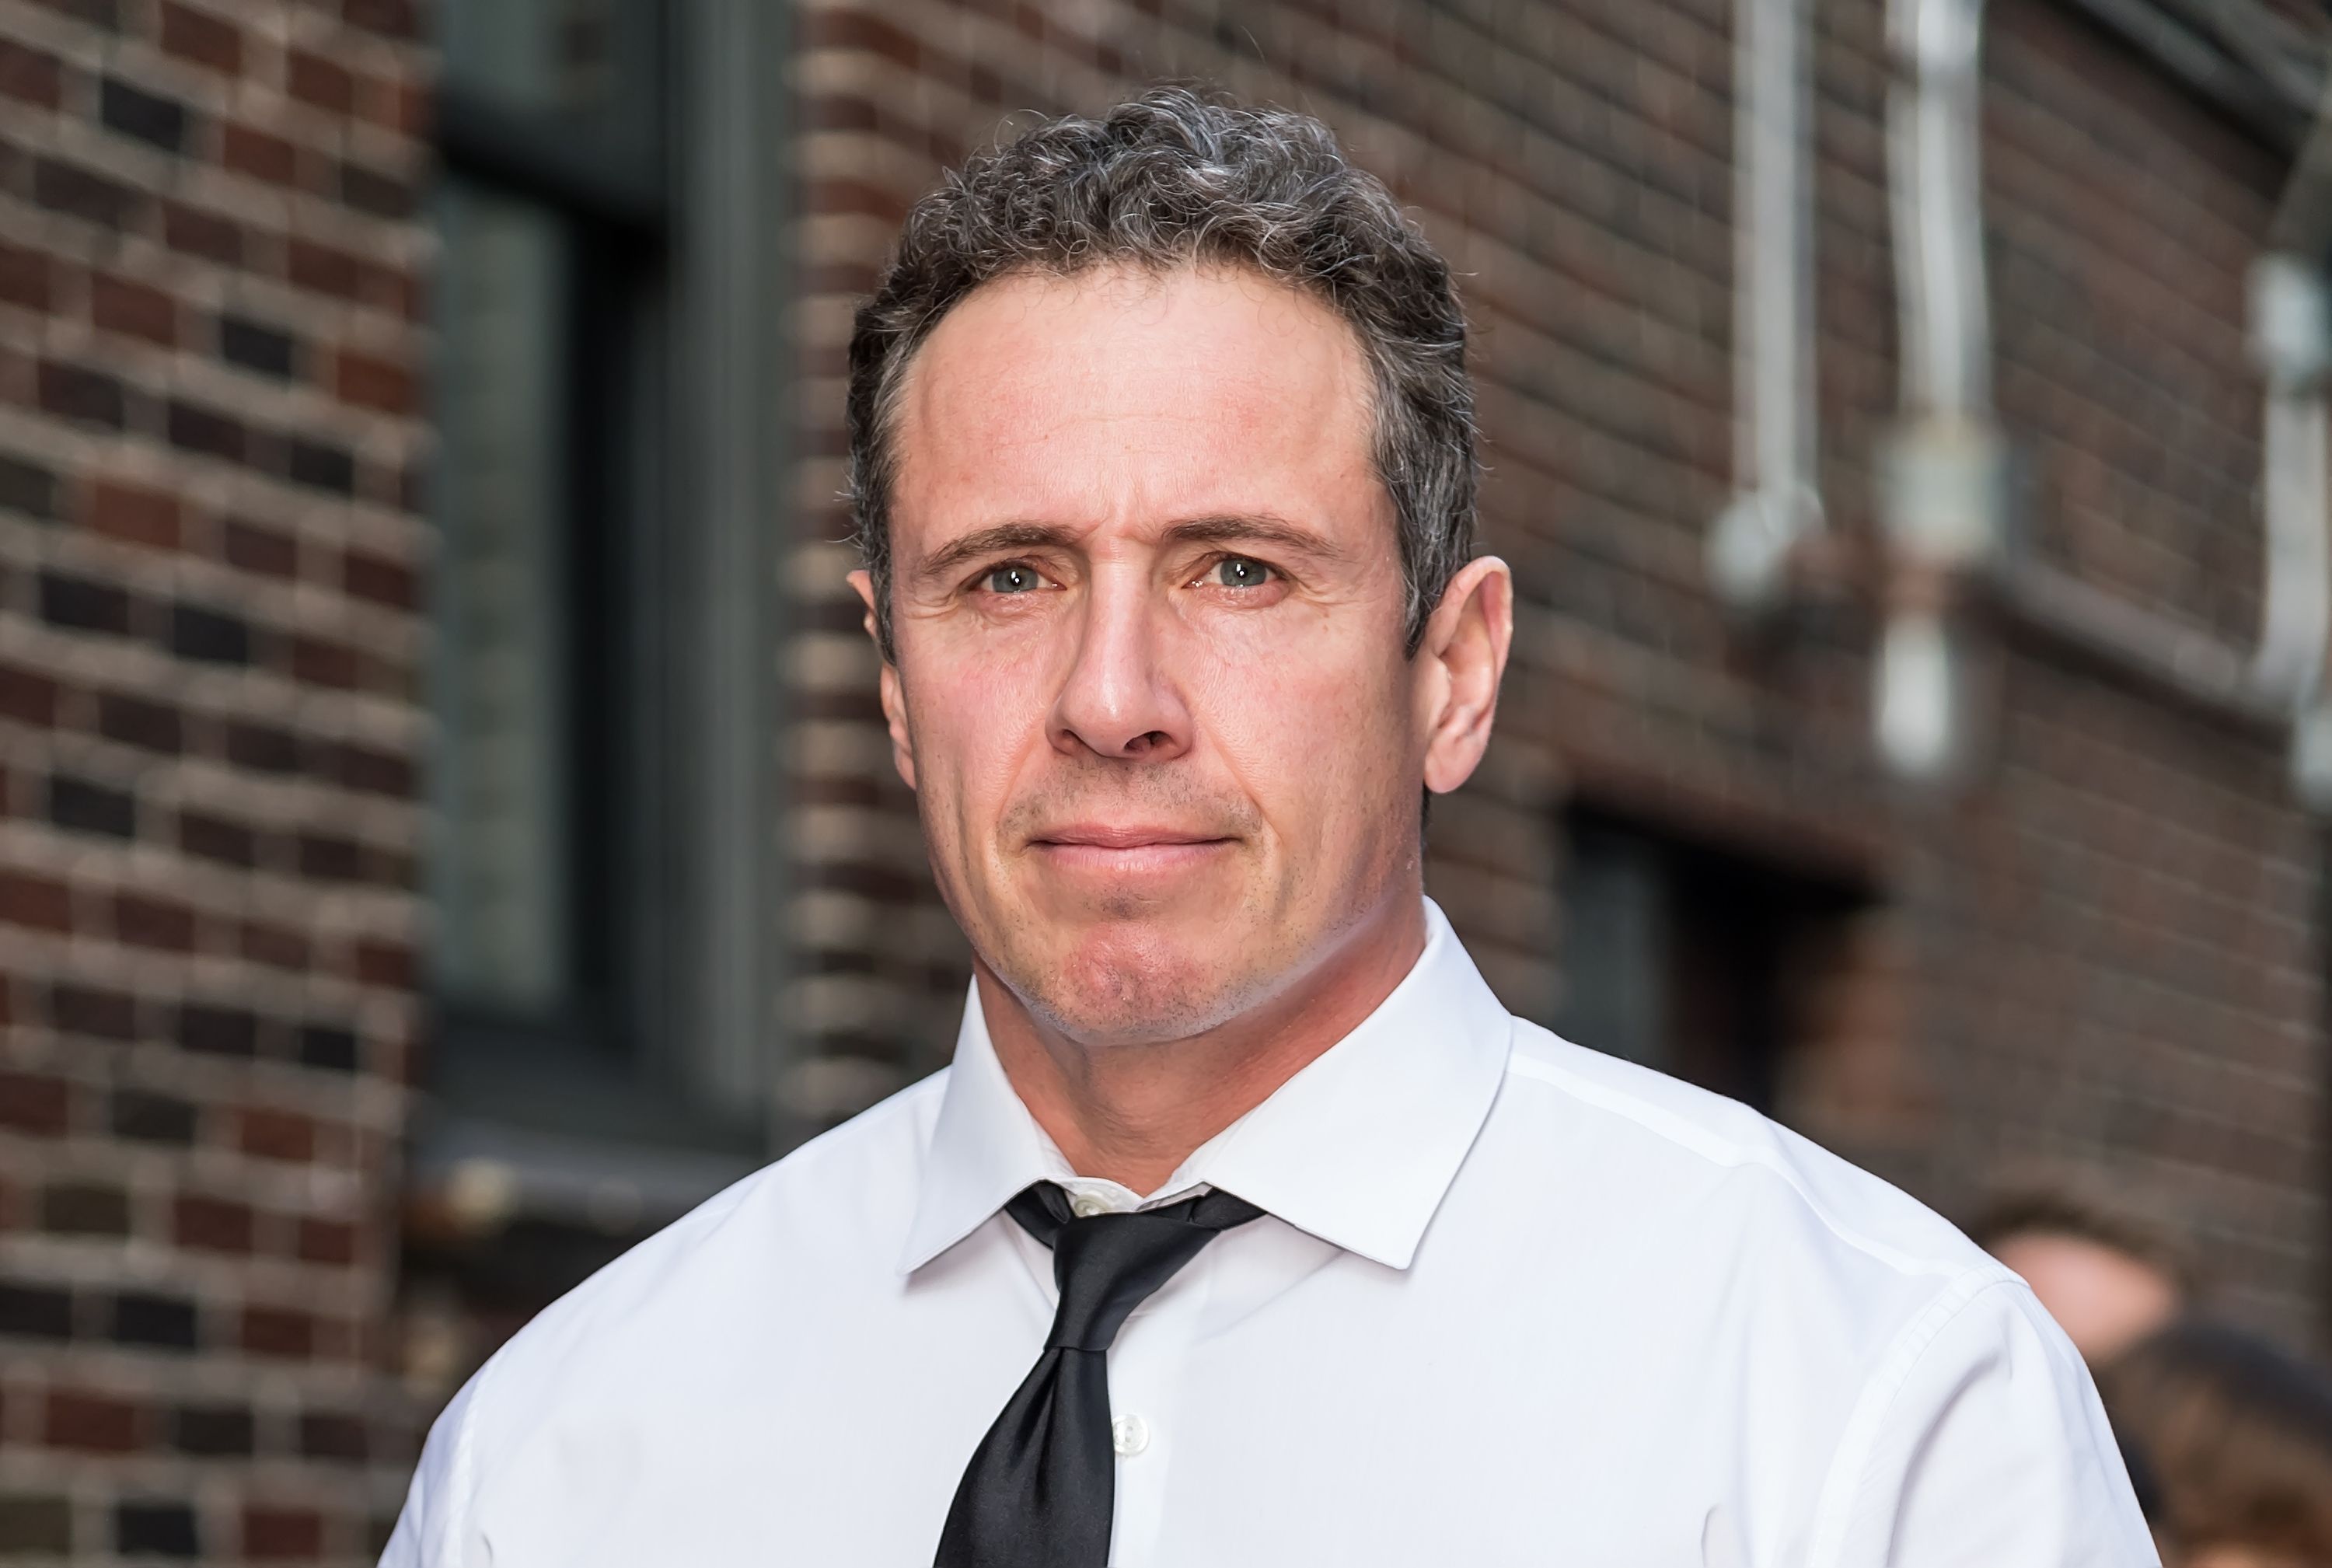 What Is Chris Cuomo Age And How Much Does He Make?